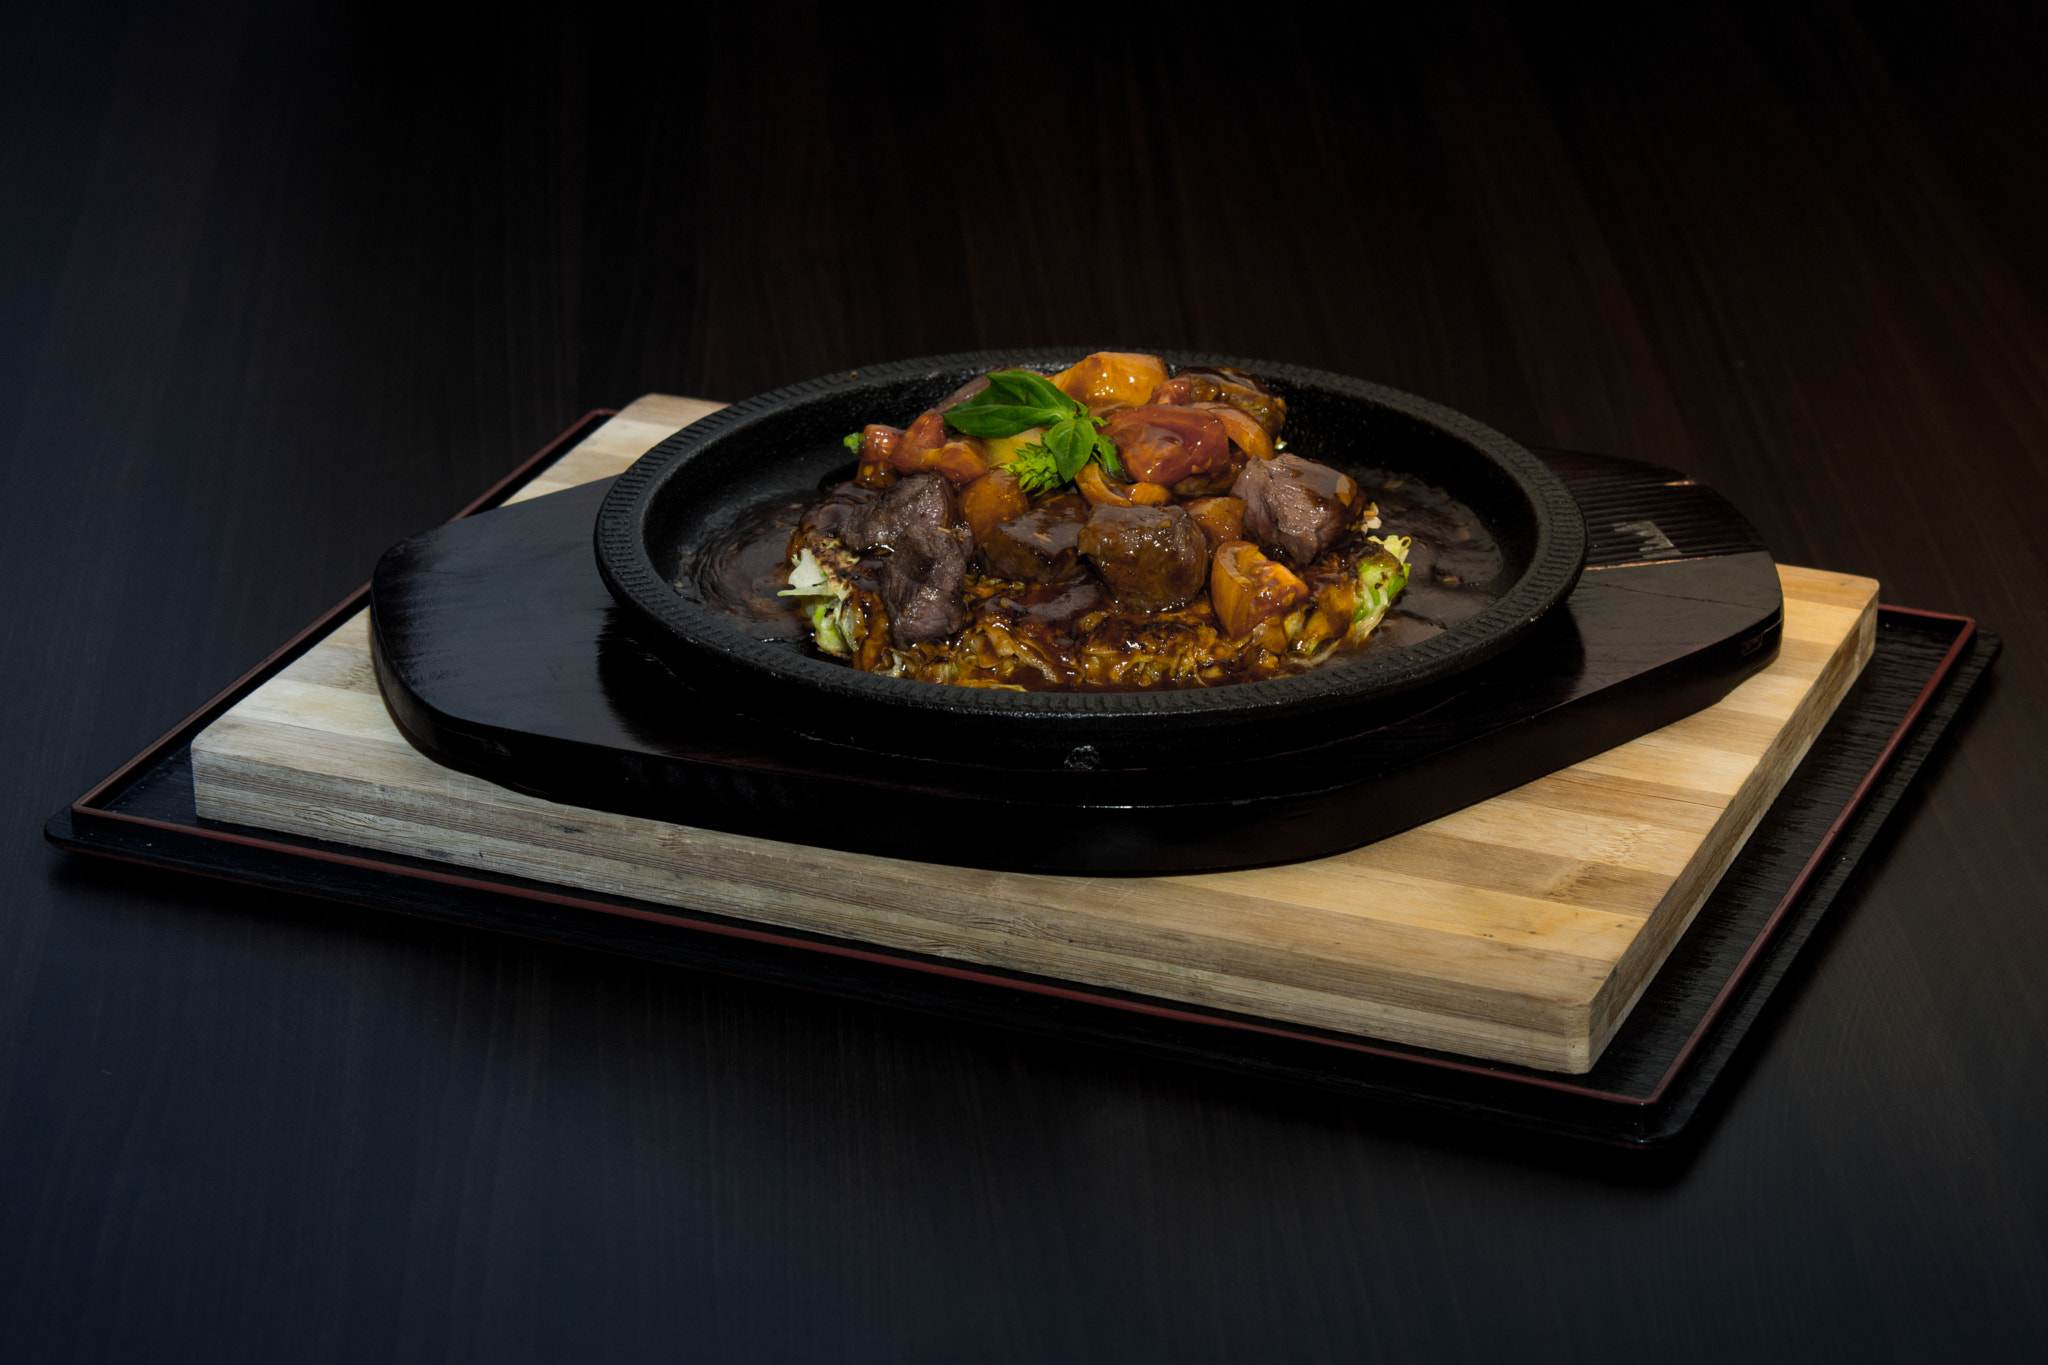 35-70mm F4 sample photo. Delicious sizzling food photography